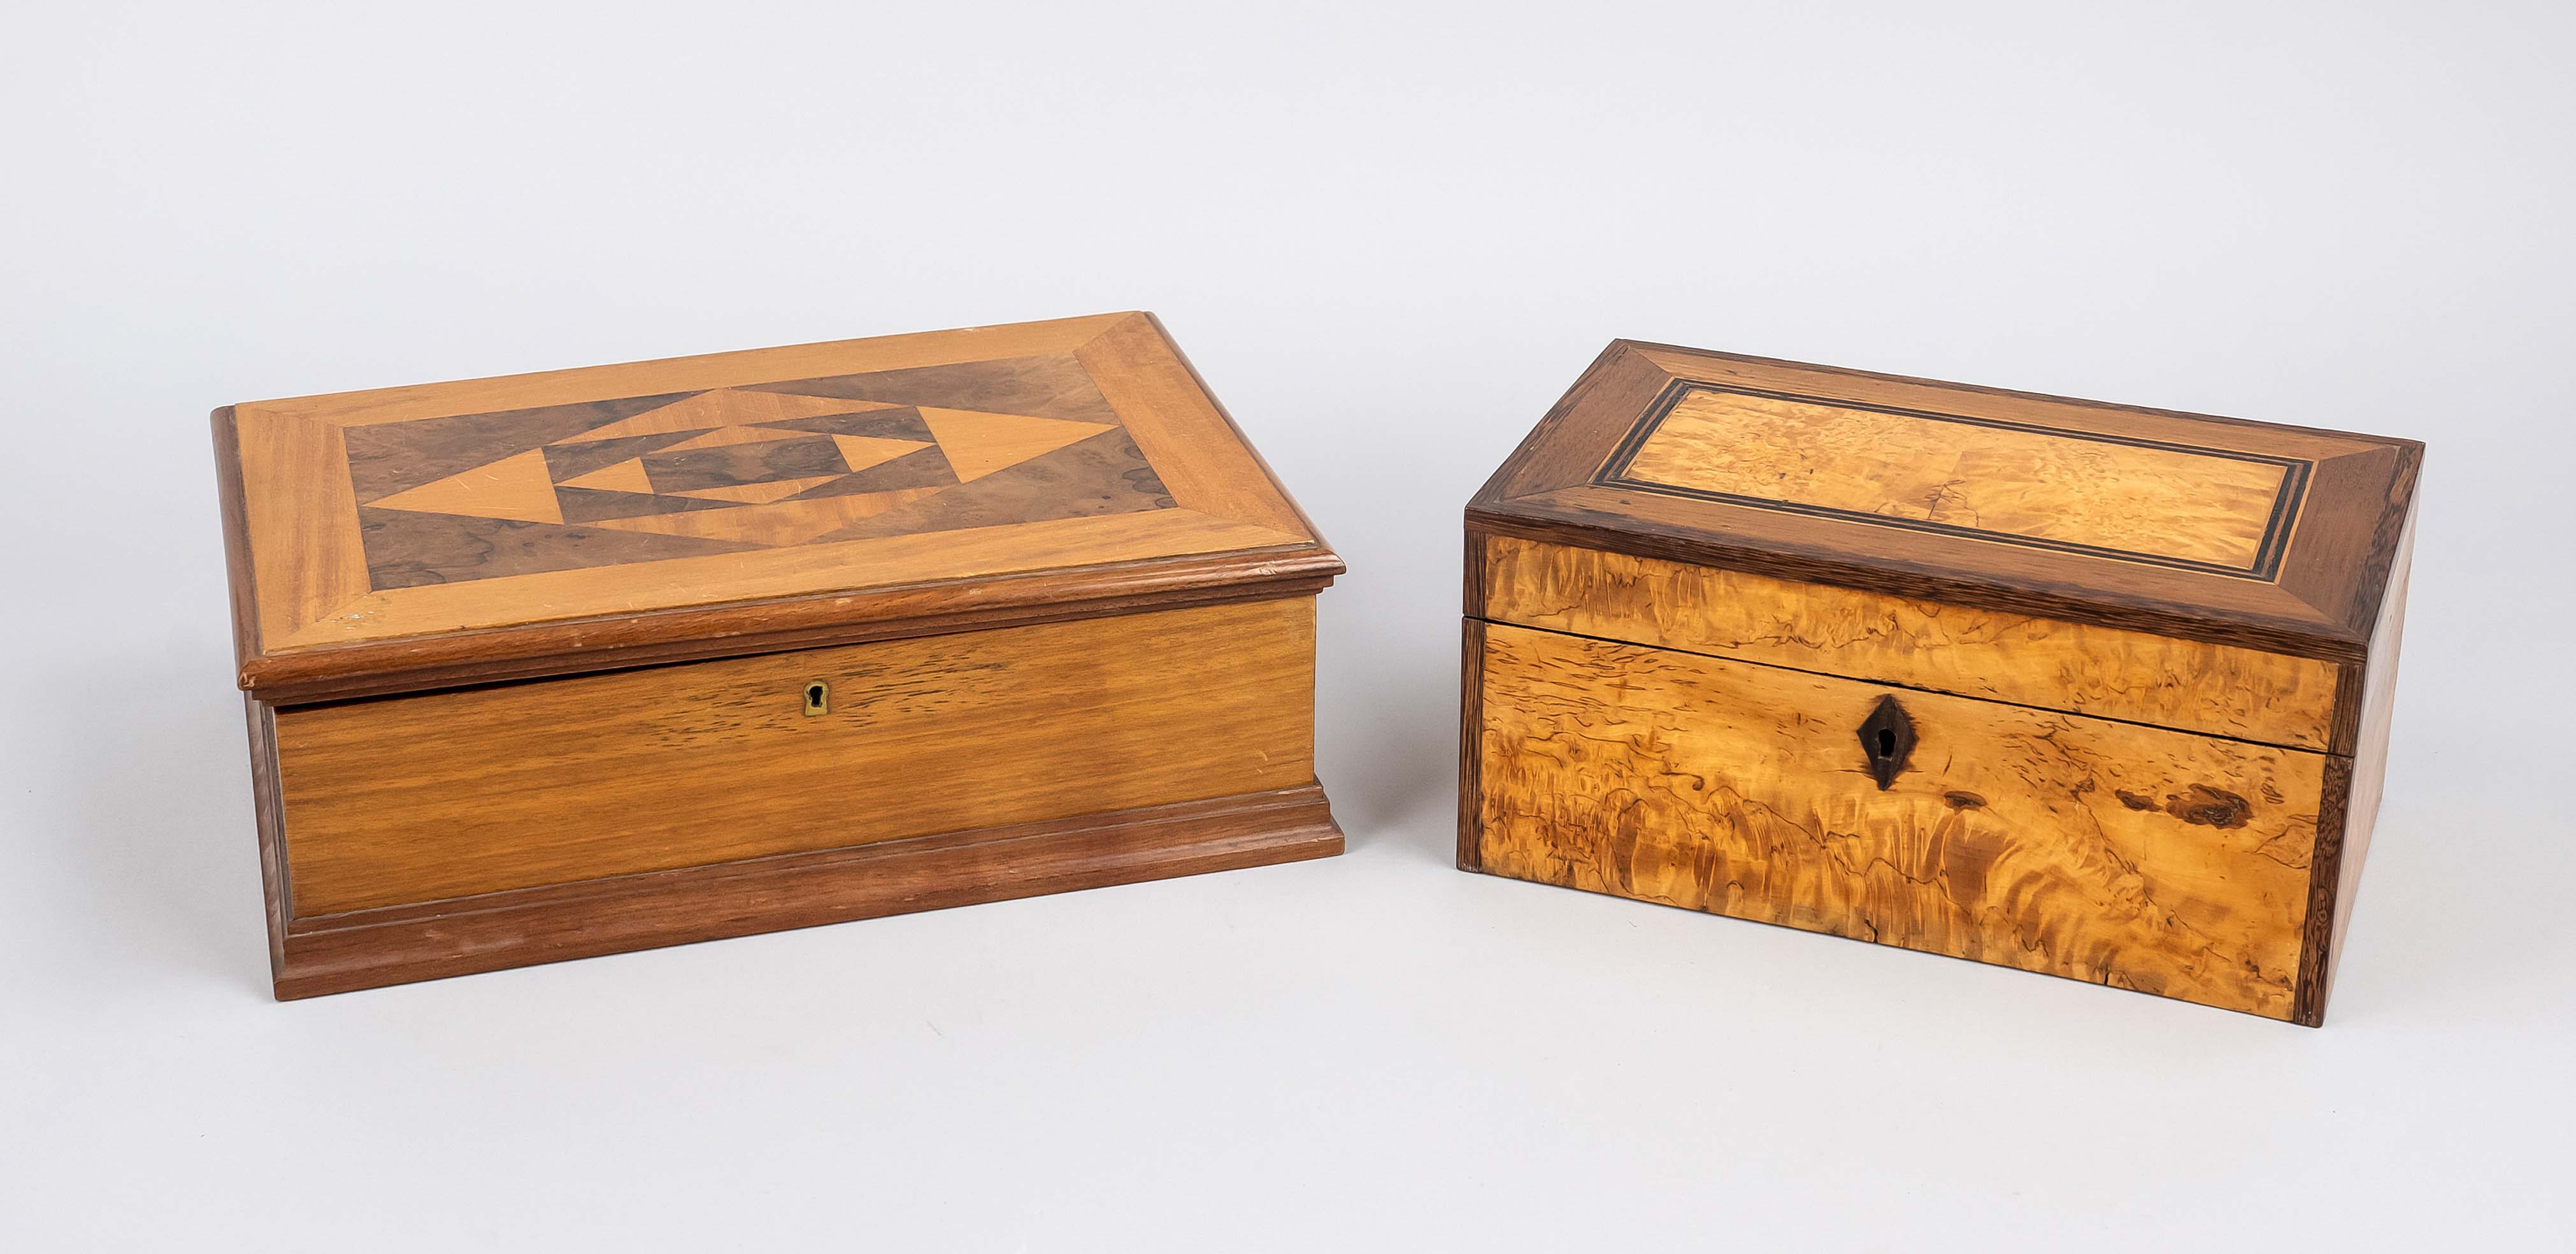 2 sewing boxes, end of 19th century, wood, veneered. Both with hinged lid with lock (without key),